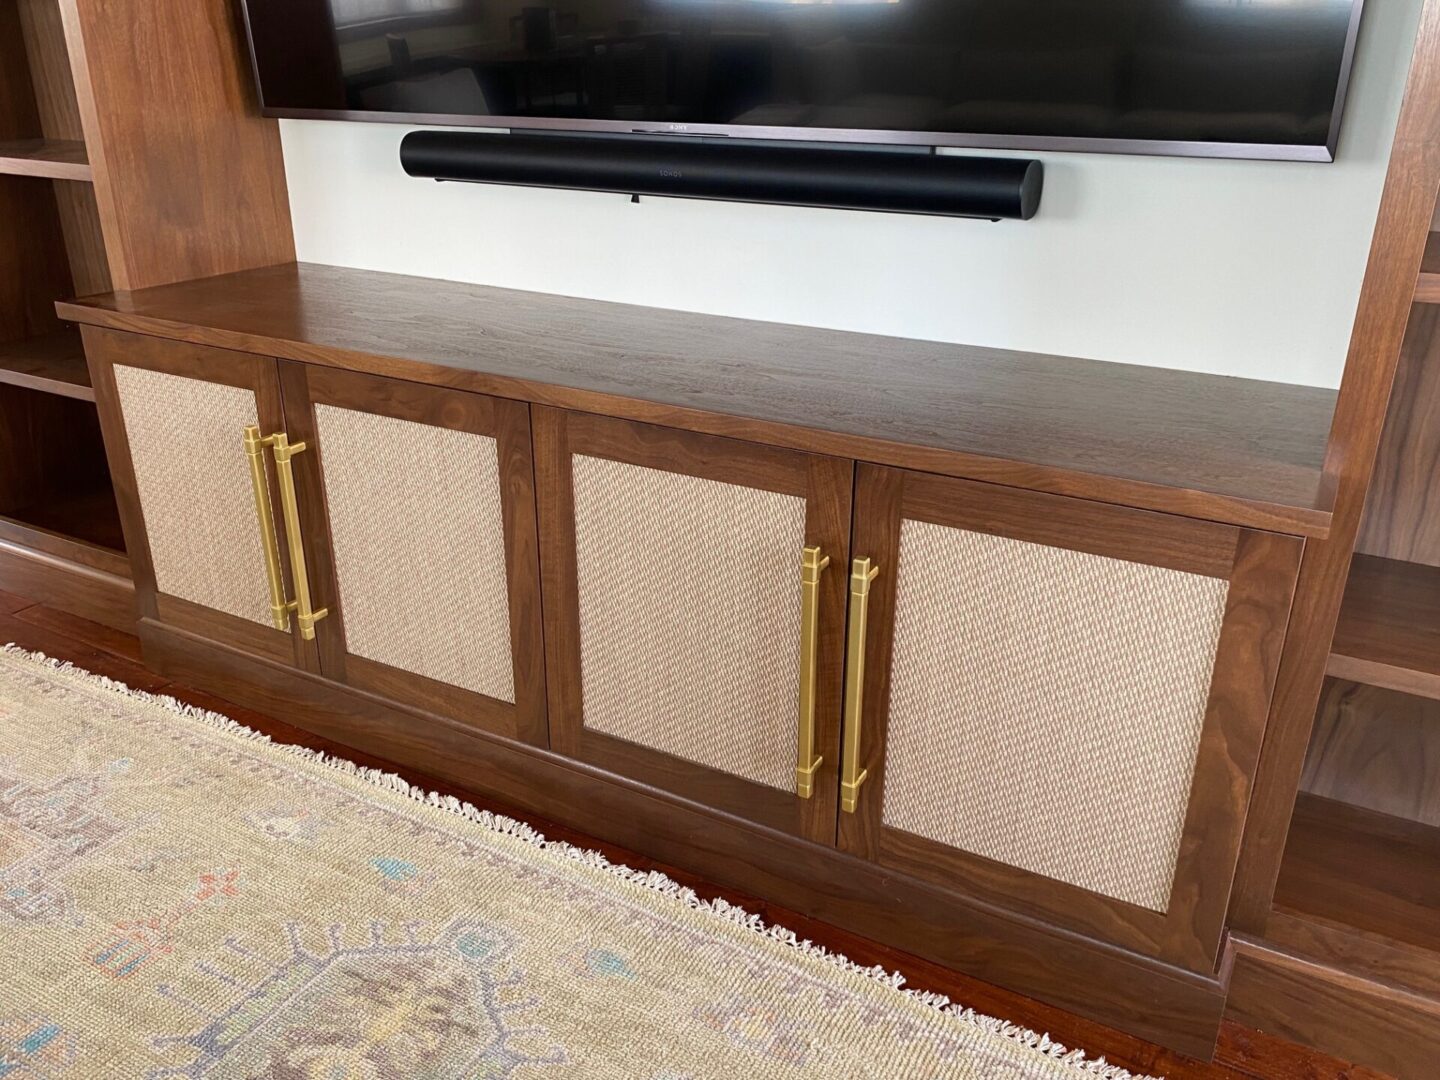 Closeup view of the tv cabinet in progress